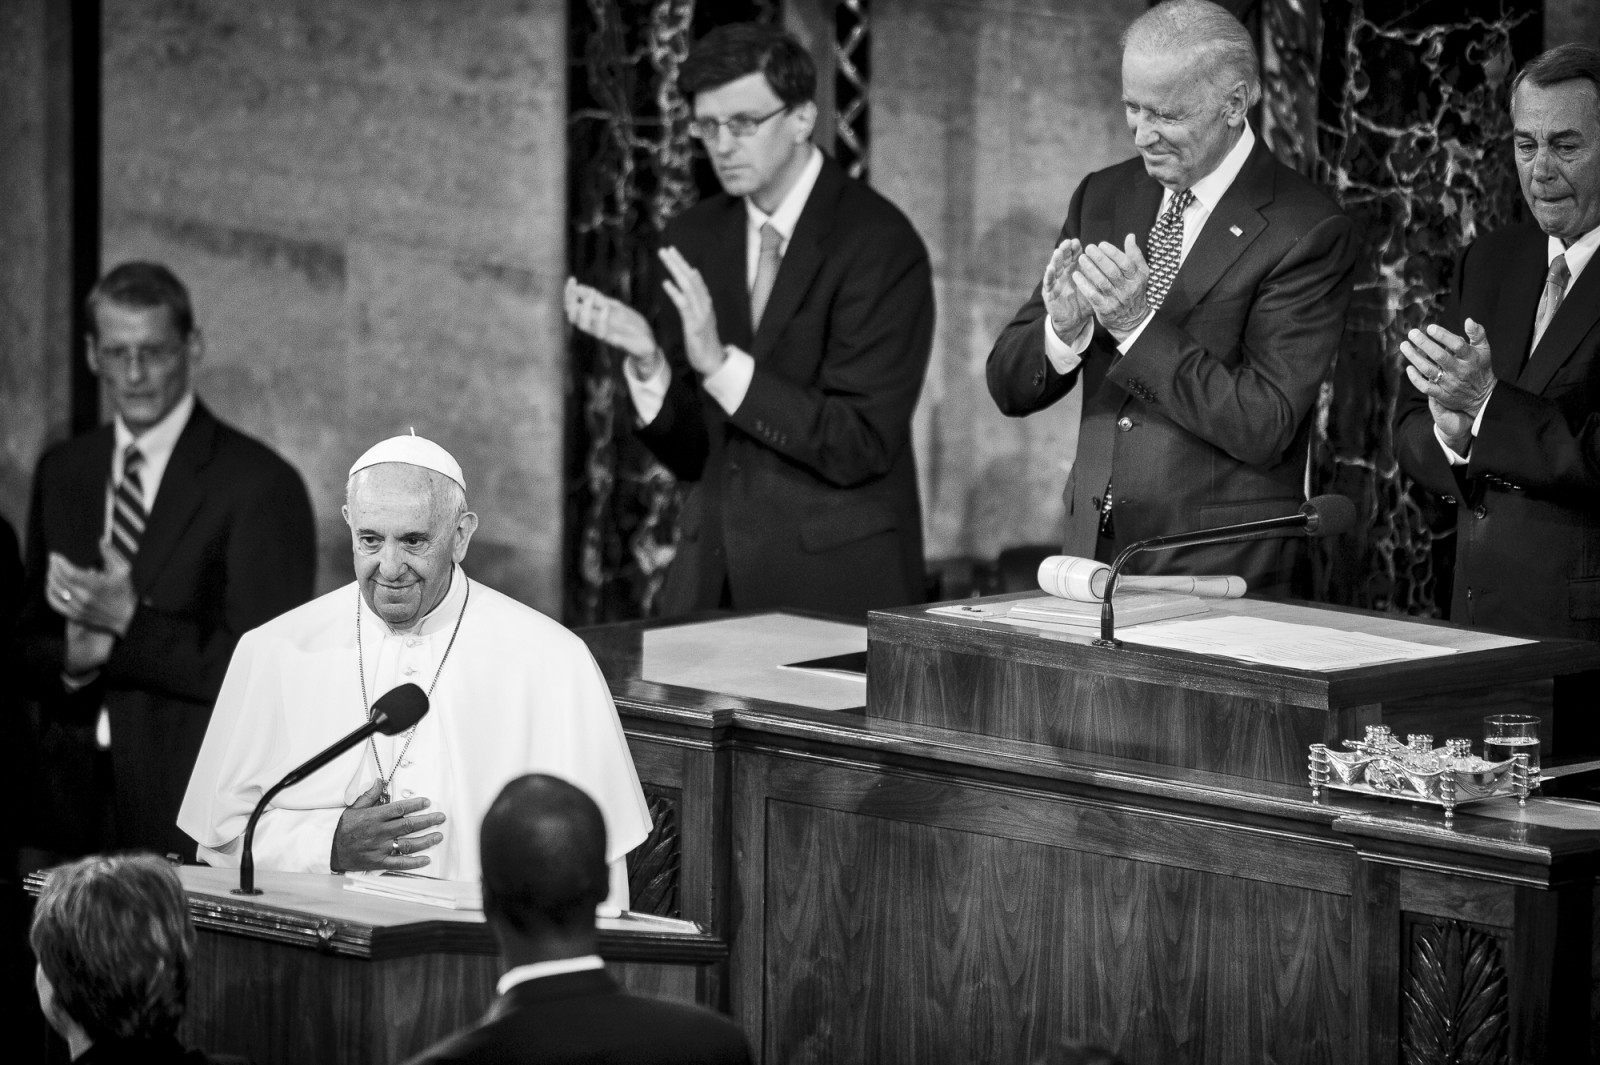 Pope Francis is acknowledged as he arrives in the chamber of the House of Representatives to speak to a joint meeting of Congress at the U.S. Capitol in Washington, District of Columbia, U.S., on Thursday, Sept. 24, 2015. Credit: Pete Marovich/Bloomberg